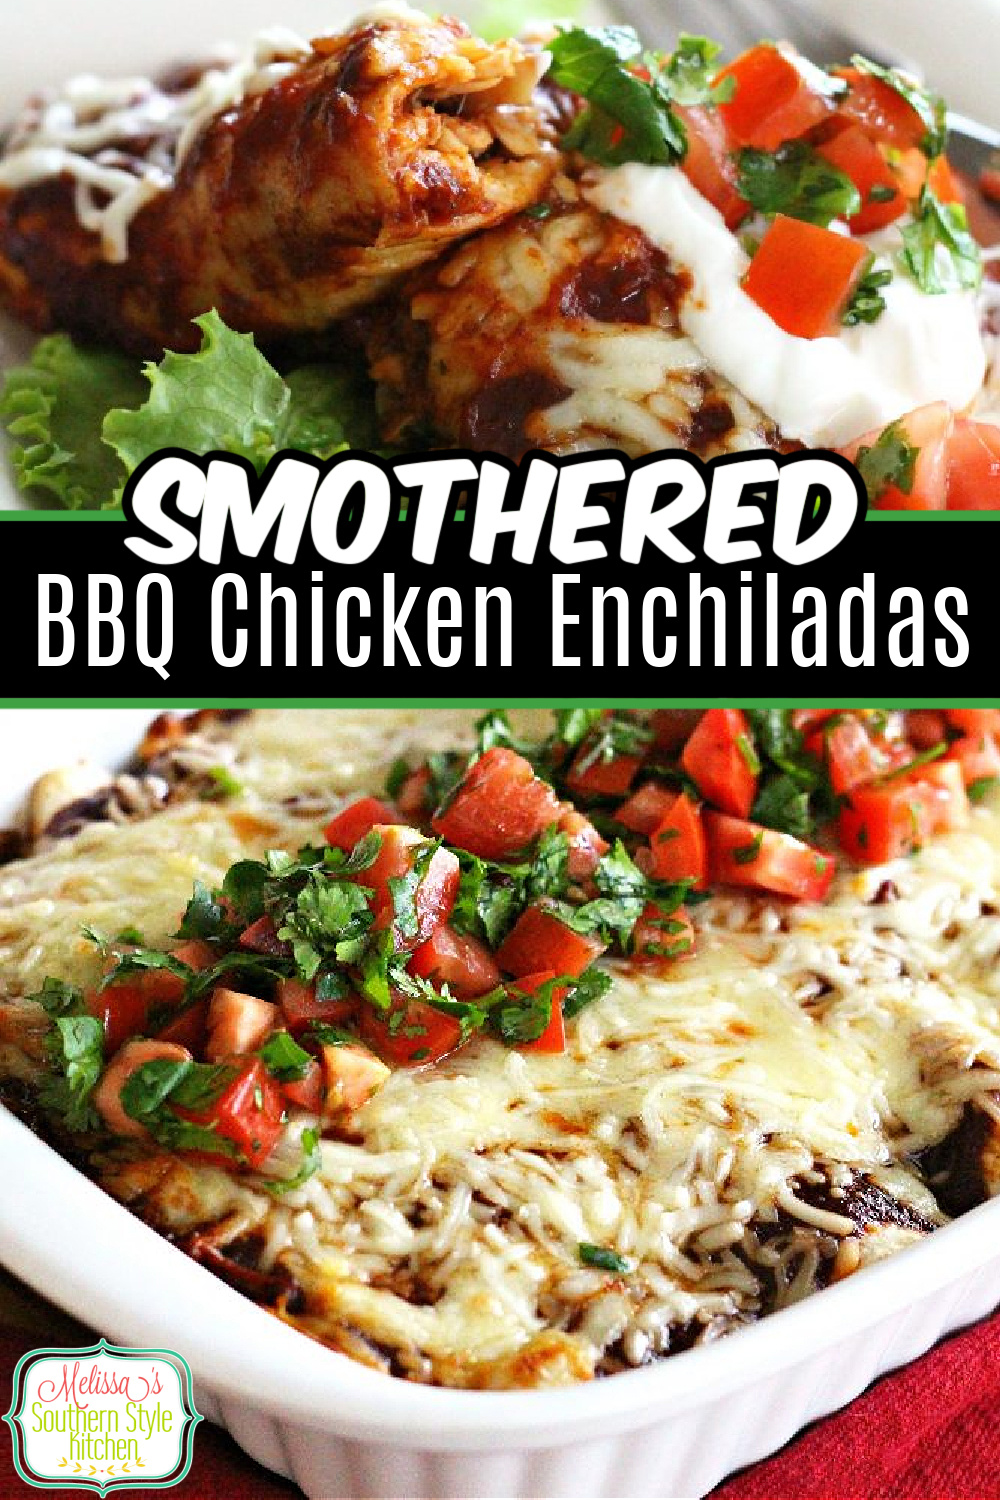 This fusion recipe for Smothered Barbecue Chicken Enchiladas combines two favorites into one South of the border inspired meal #enchiladas #barbecuechicken #easychickenrecipes #chicken #mexicanfood #chickenchiladas #southernrecipes via @melissasssk